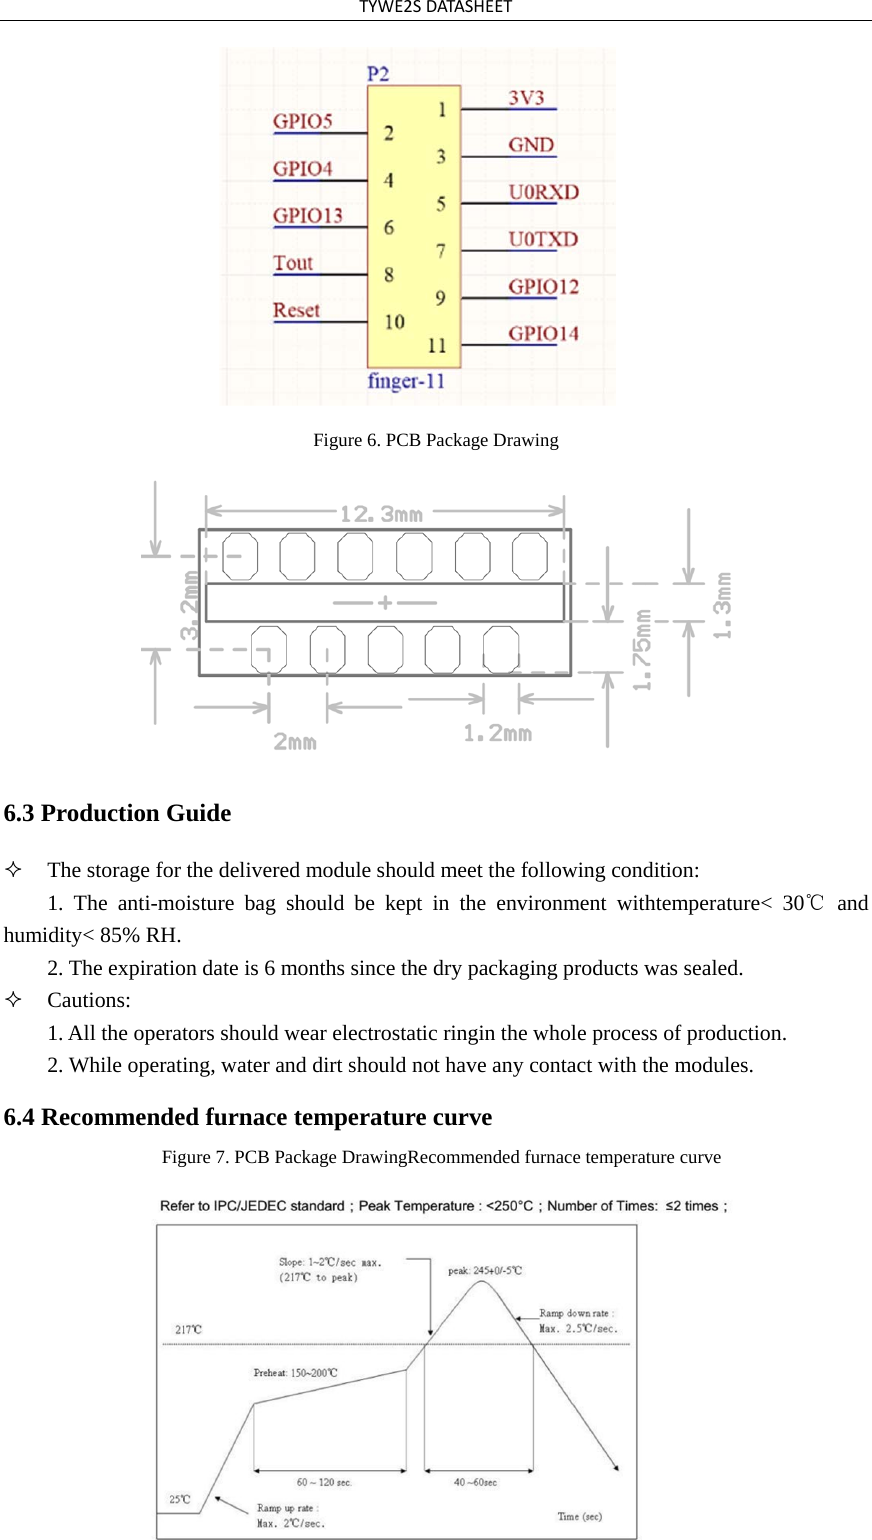 TYWE2SDATASHEETFigure 6. PCB Package Drawing 6.3 Production Guide The storage for the delivered module should meet the following condition:1. The anti-moisture bag should be kept in the environment withtemperature&lt; 30℃ andhumidity&lt; 85% RH. 2. The expiration date is 6 months since the dry packaging products was sealed.Cautions:1. All the operators should wear electrostatic ringin the whole process of production.2. While operating, water and dirt should not have any contact with the modules.6.4 Recommended furnace temperature curve Figure 7. PCB Package DrawingRecommended furnace temperature curve 